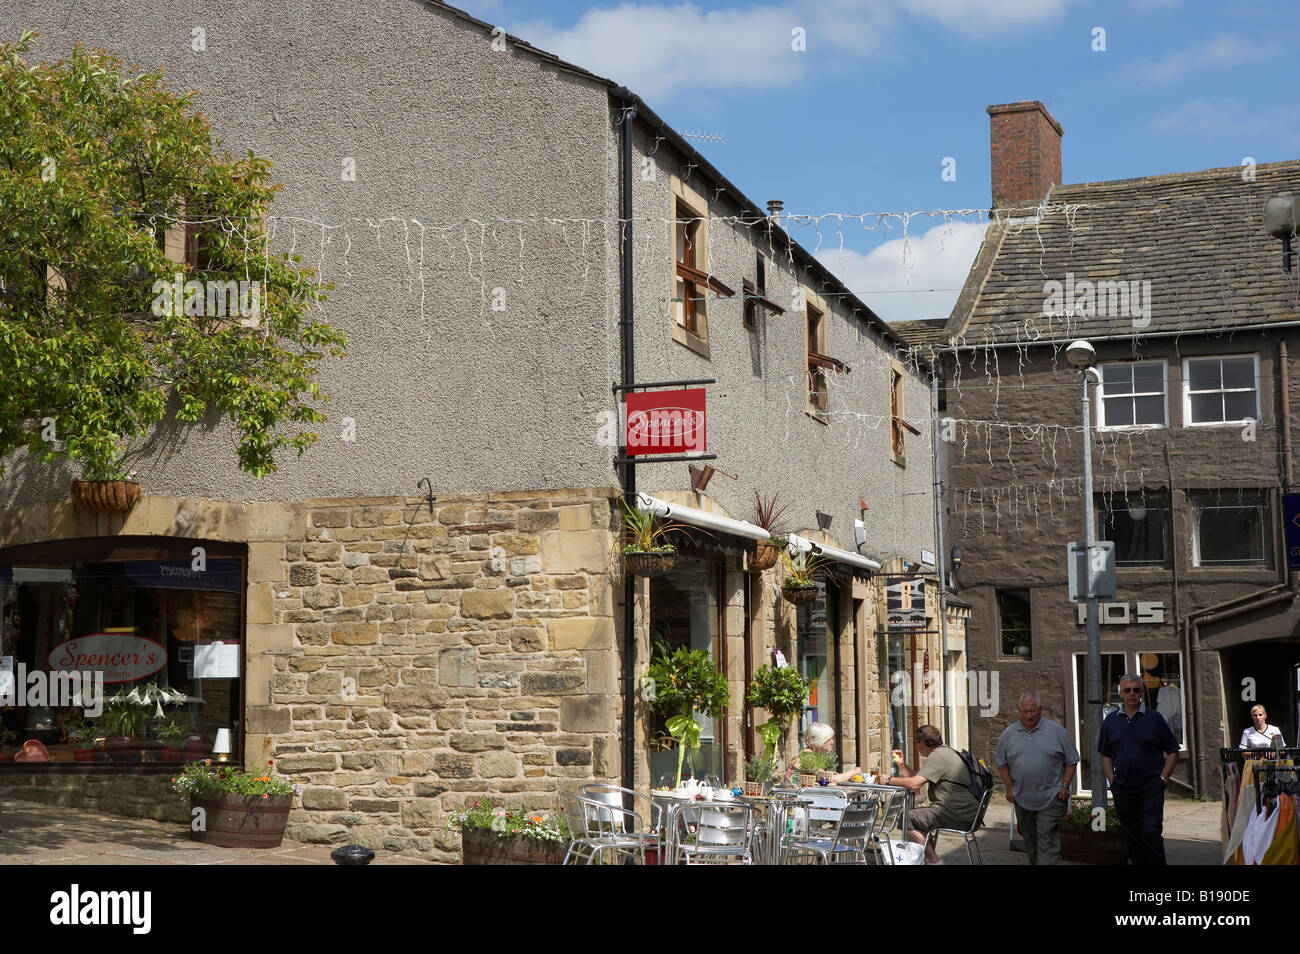 CAFE IN SKIPTON TOWN CENTRE SUMMER YORKSHIRE ENGLAND Stock Photo